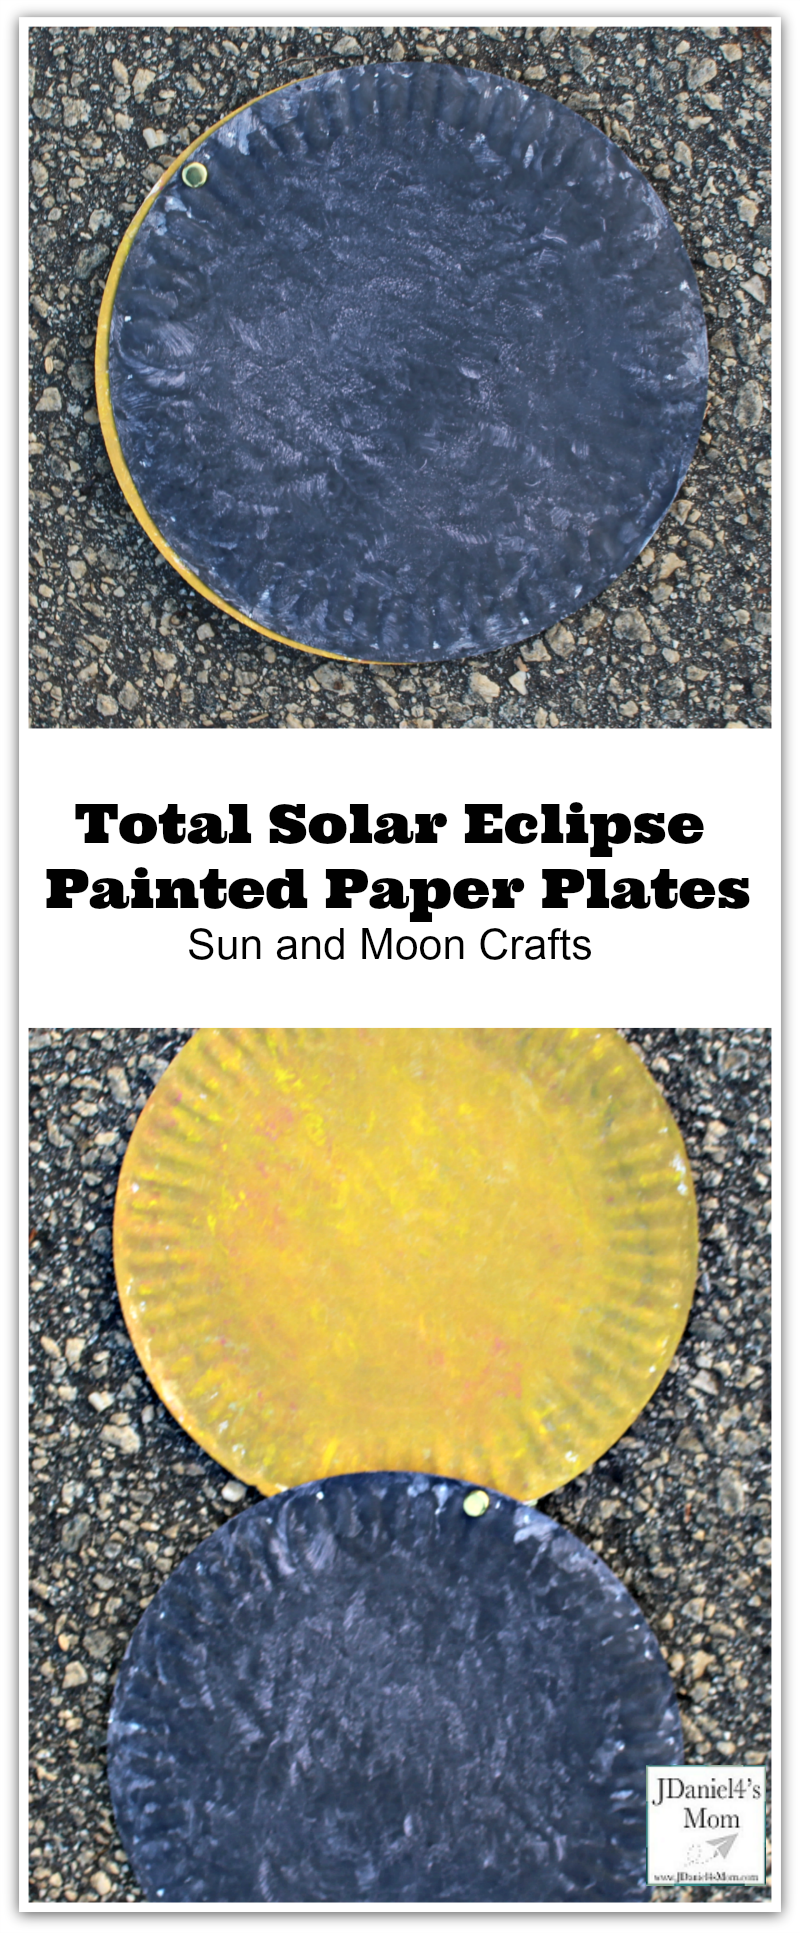 Total Eclipse Painted Paper Plates- Sun and Moon Crafts : This craft can be used to demonstrate how a total solar eclipse happens.